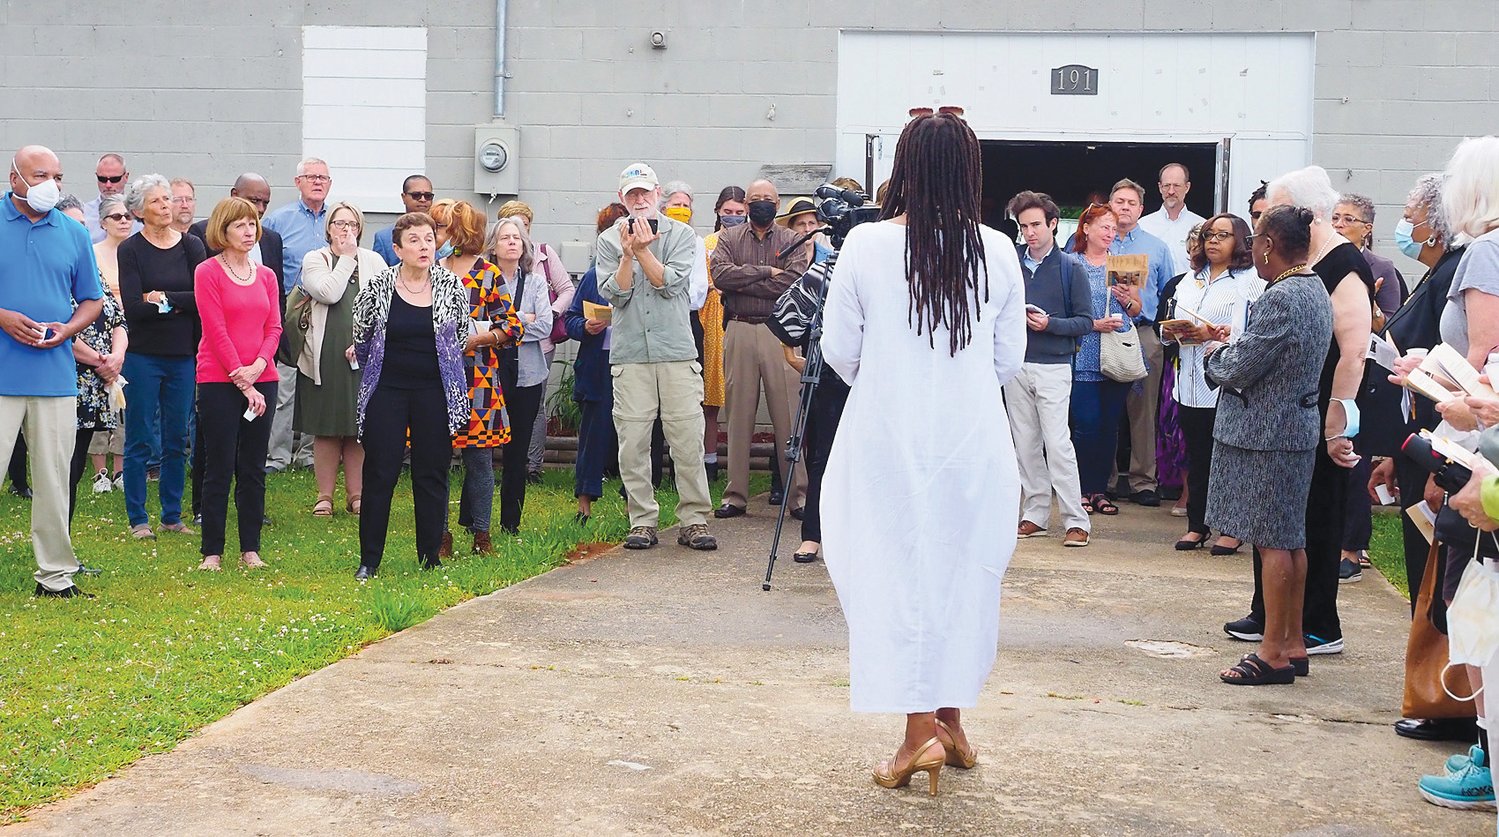 Karen Howard leads the libation ceremony at Saturday's remembrance event.